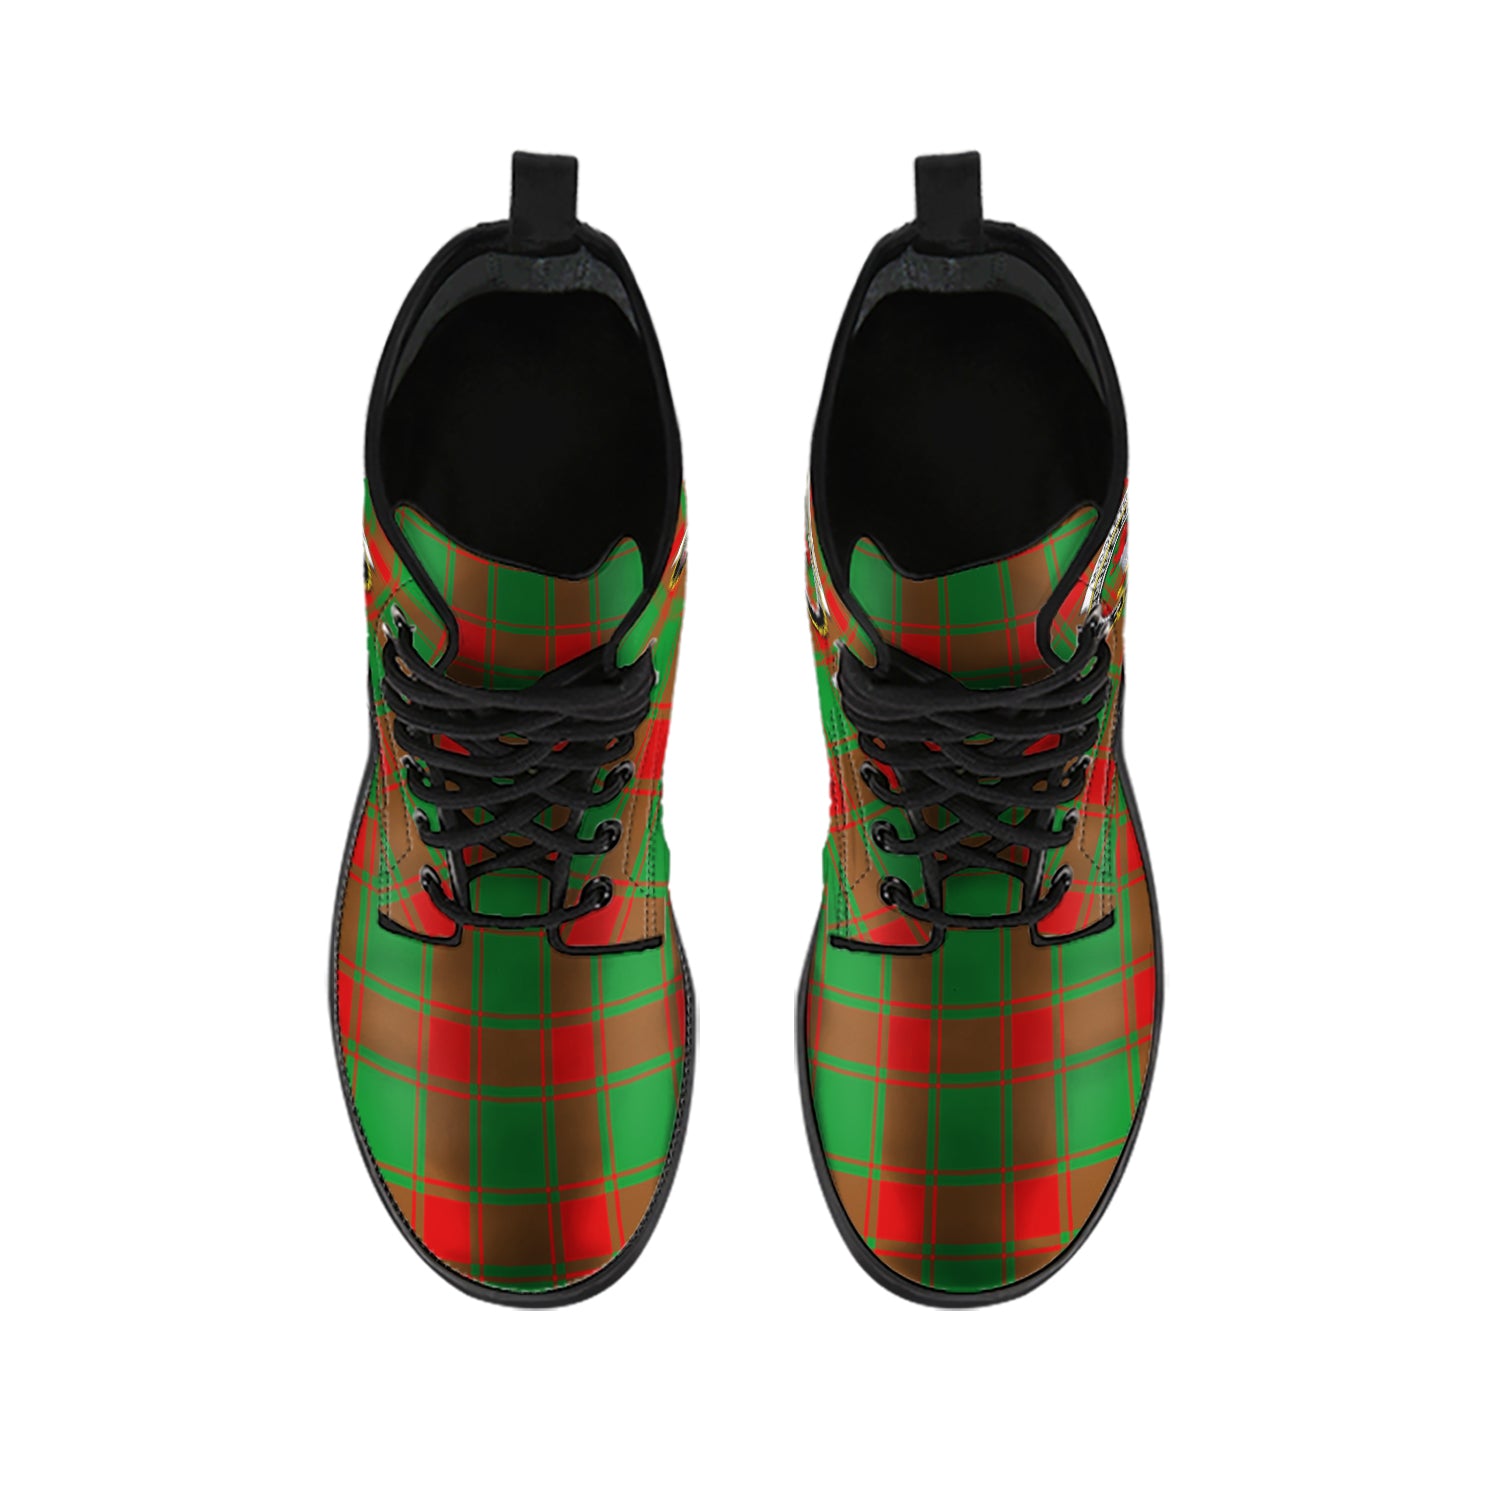 middleton-modern-tartan-leather-boots-with-family-crest